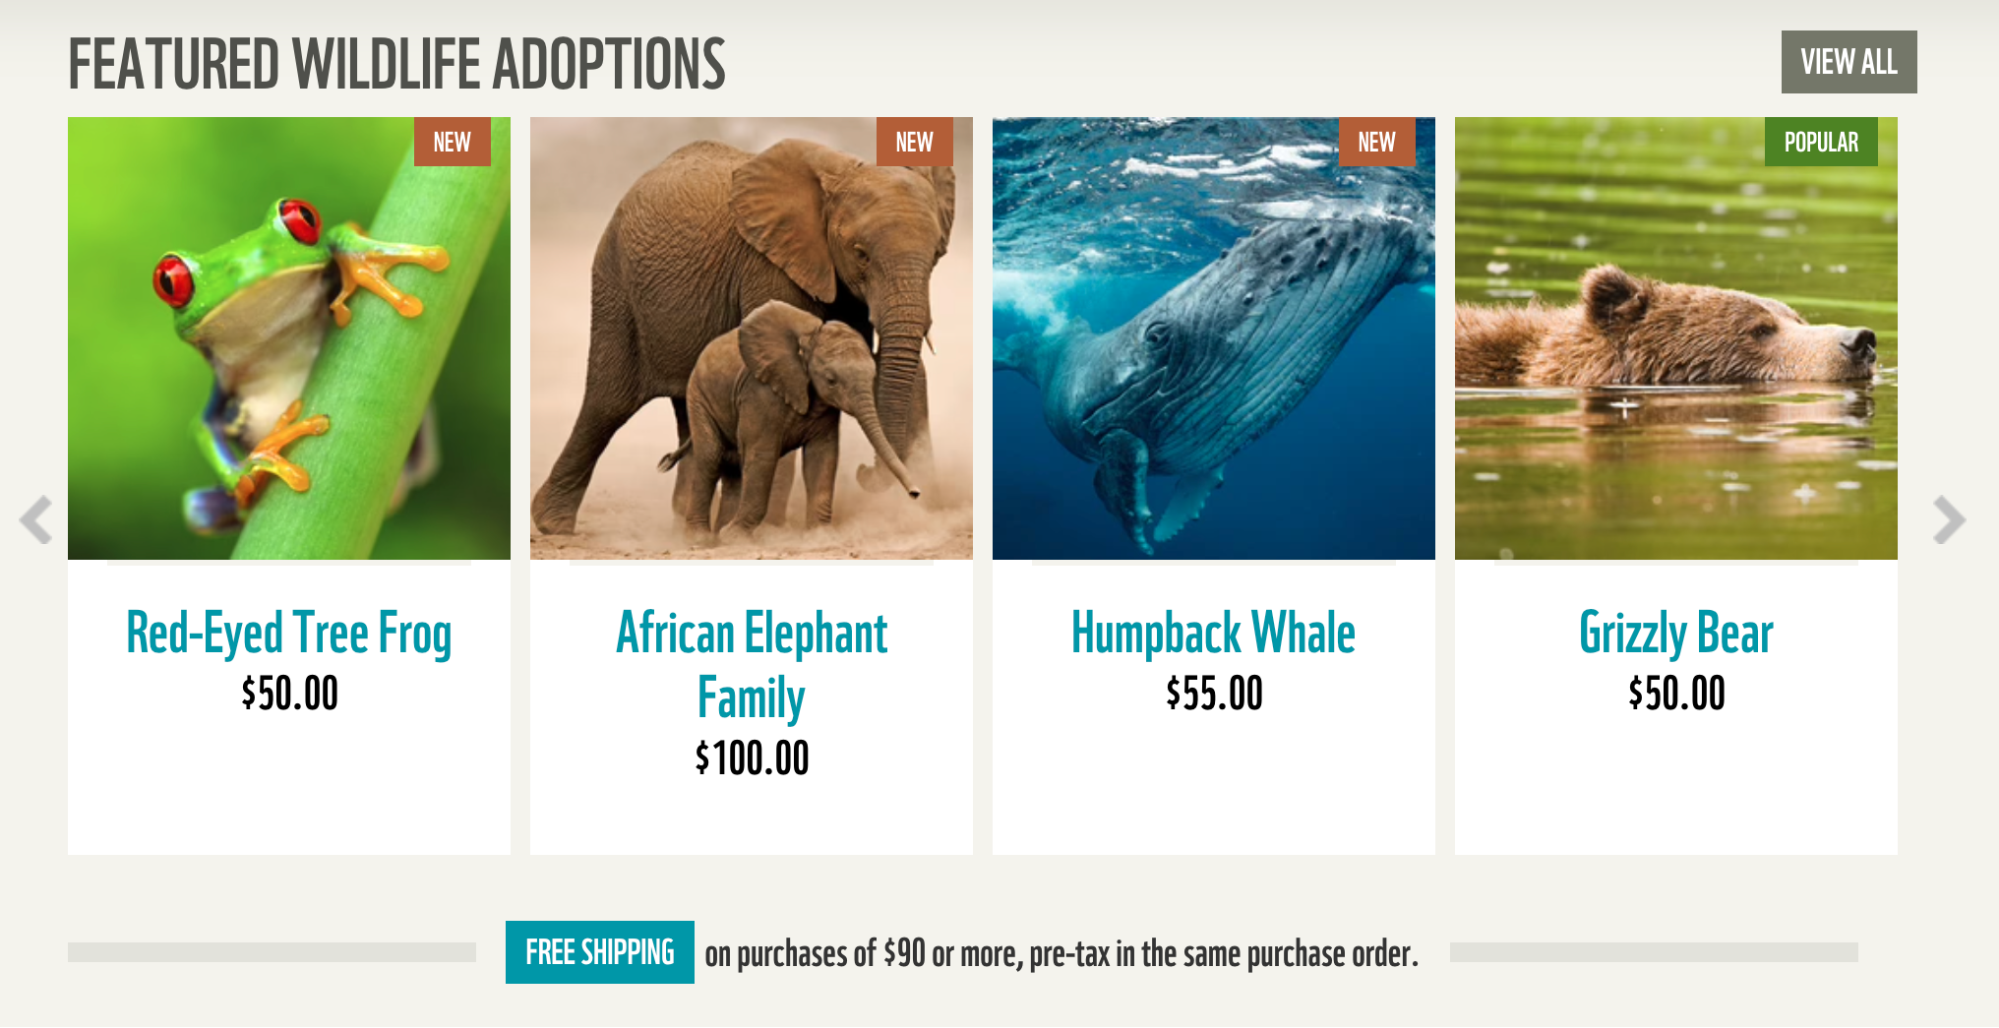 World Wildlife Foundation product listings featuring a frog, elephants, a whale, and a grizzly bear, animals you can “buy” with your donation.